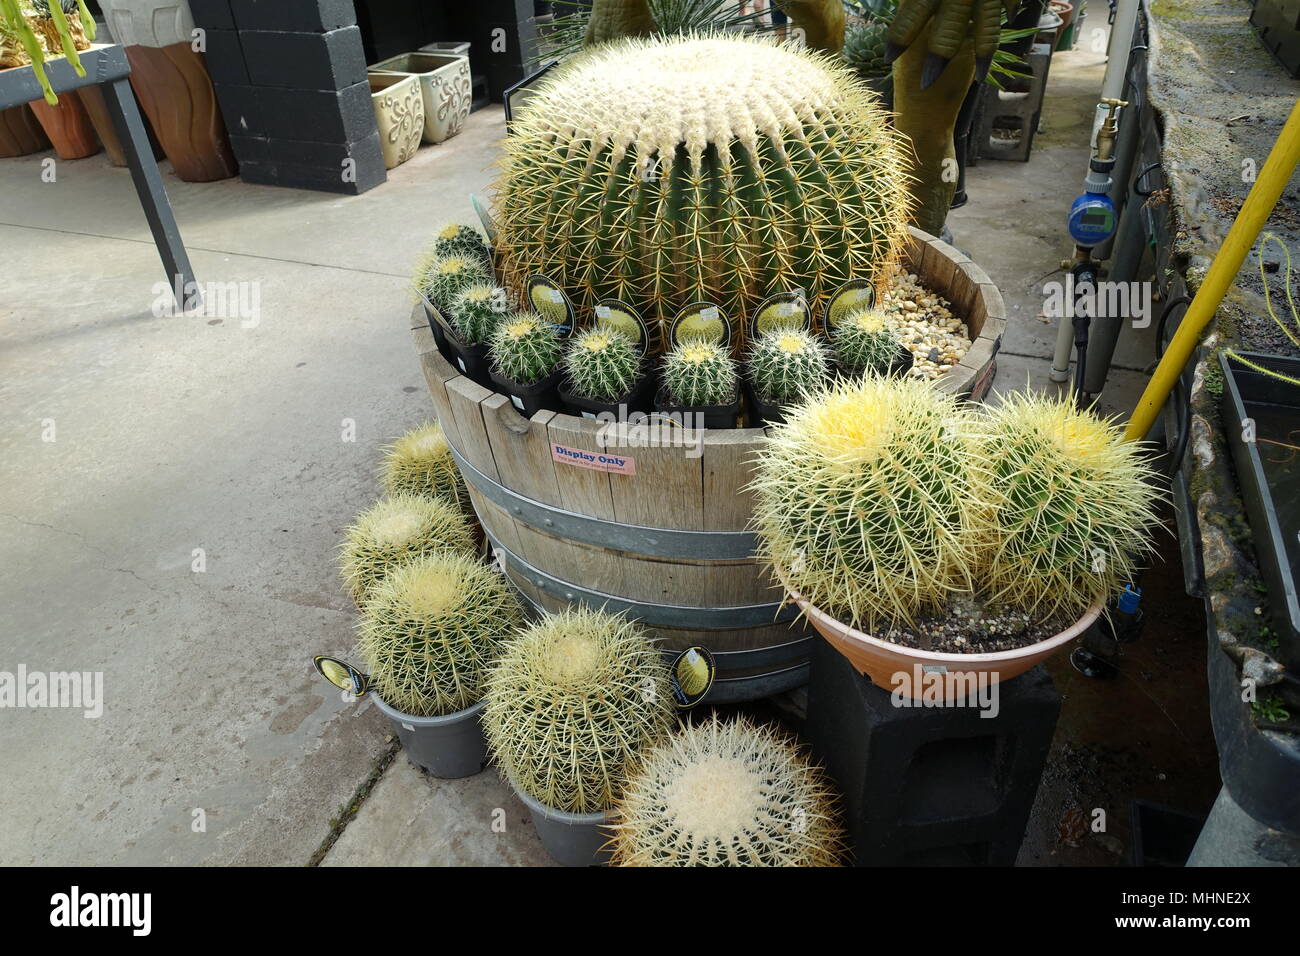 Echinocactus grusonii or commonly known as Golden Barrel Cactus Stock Photo